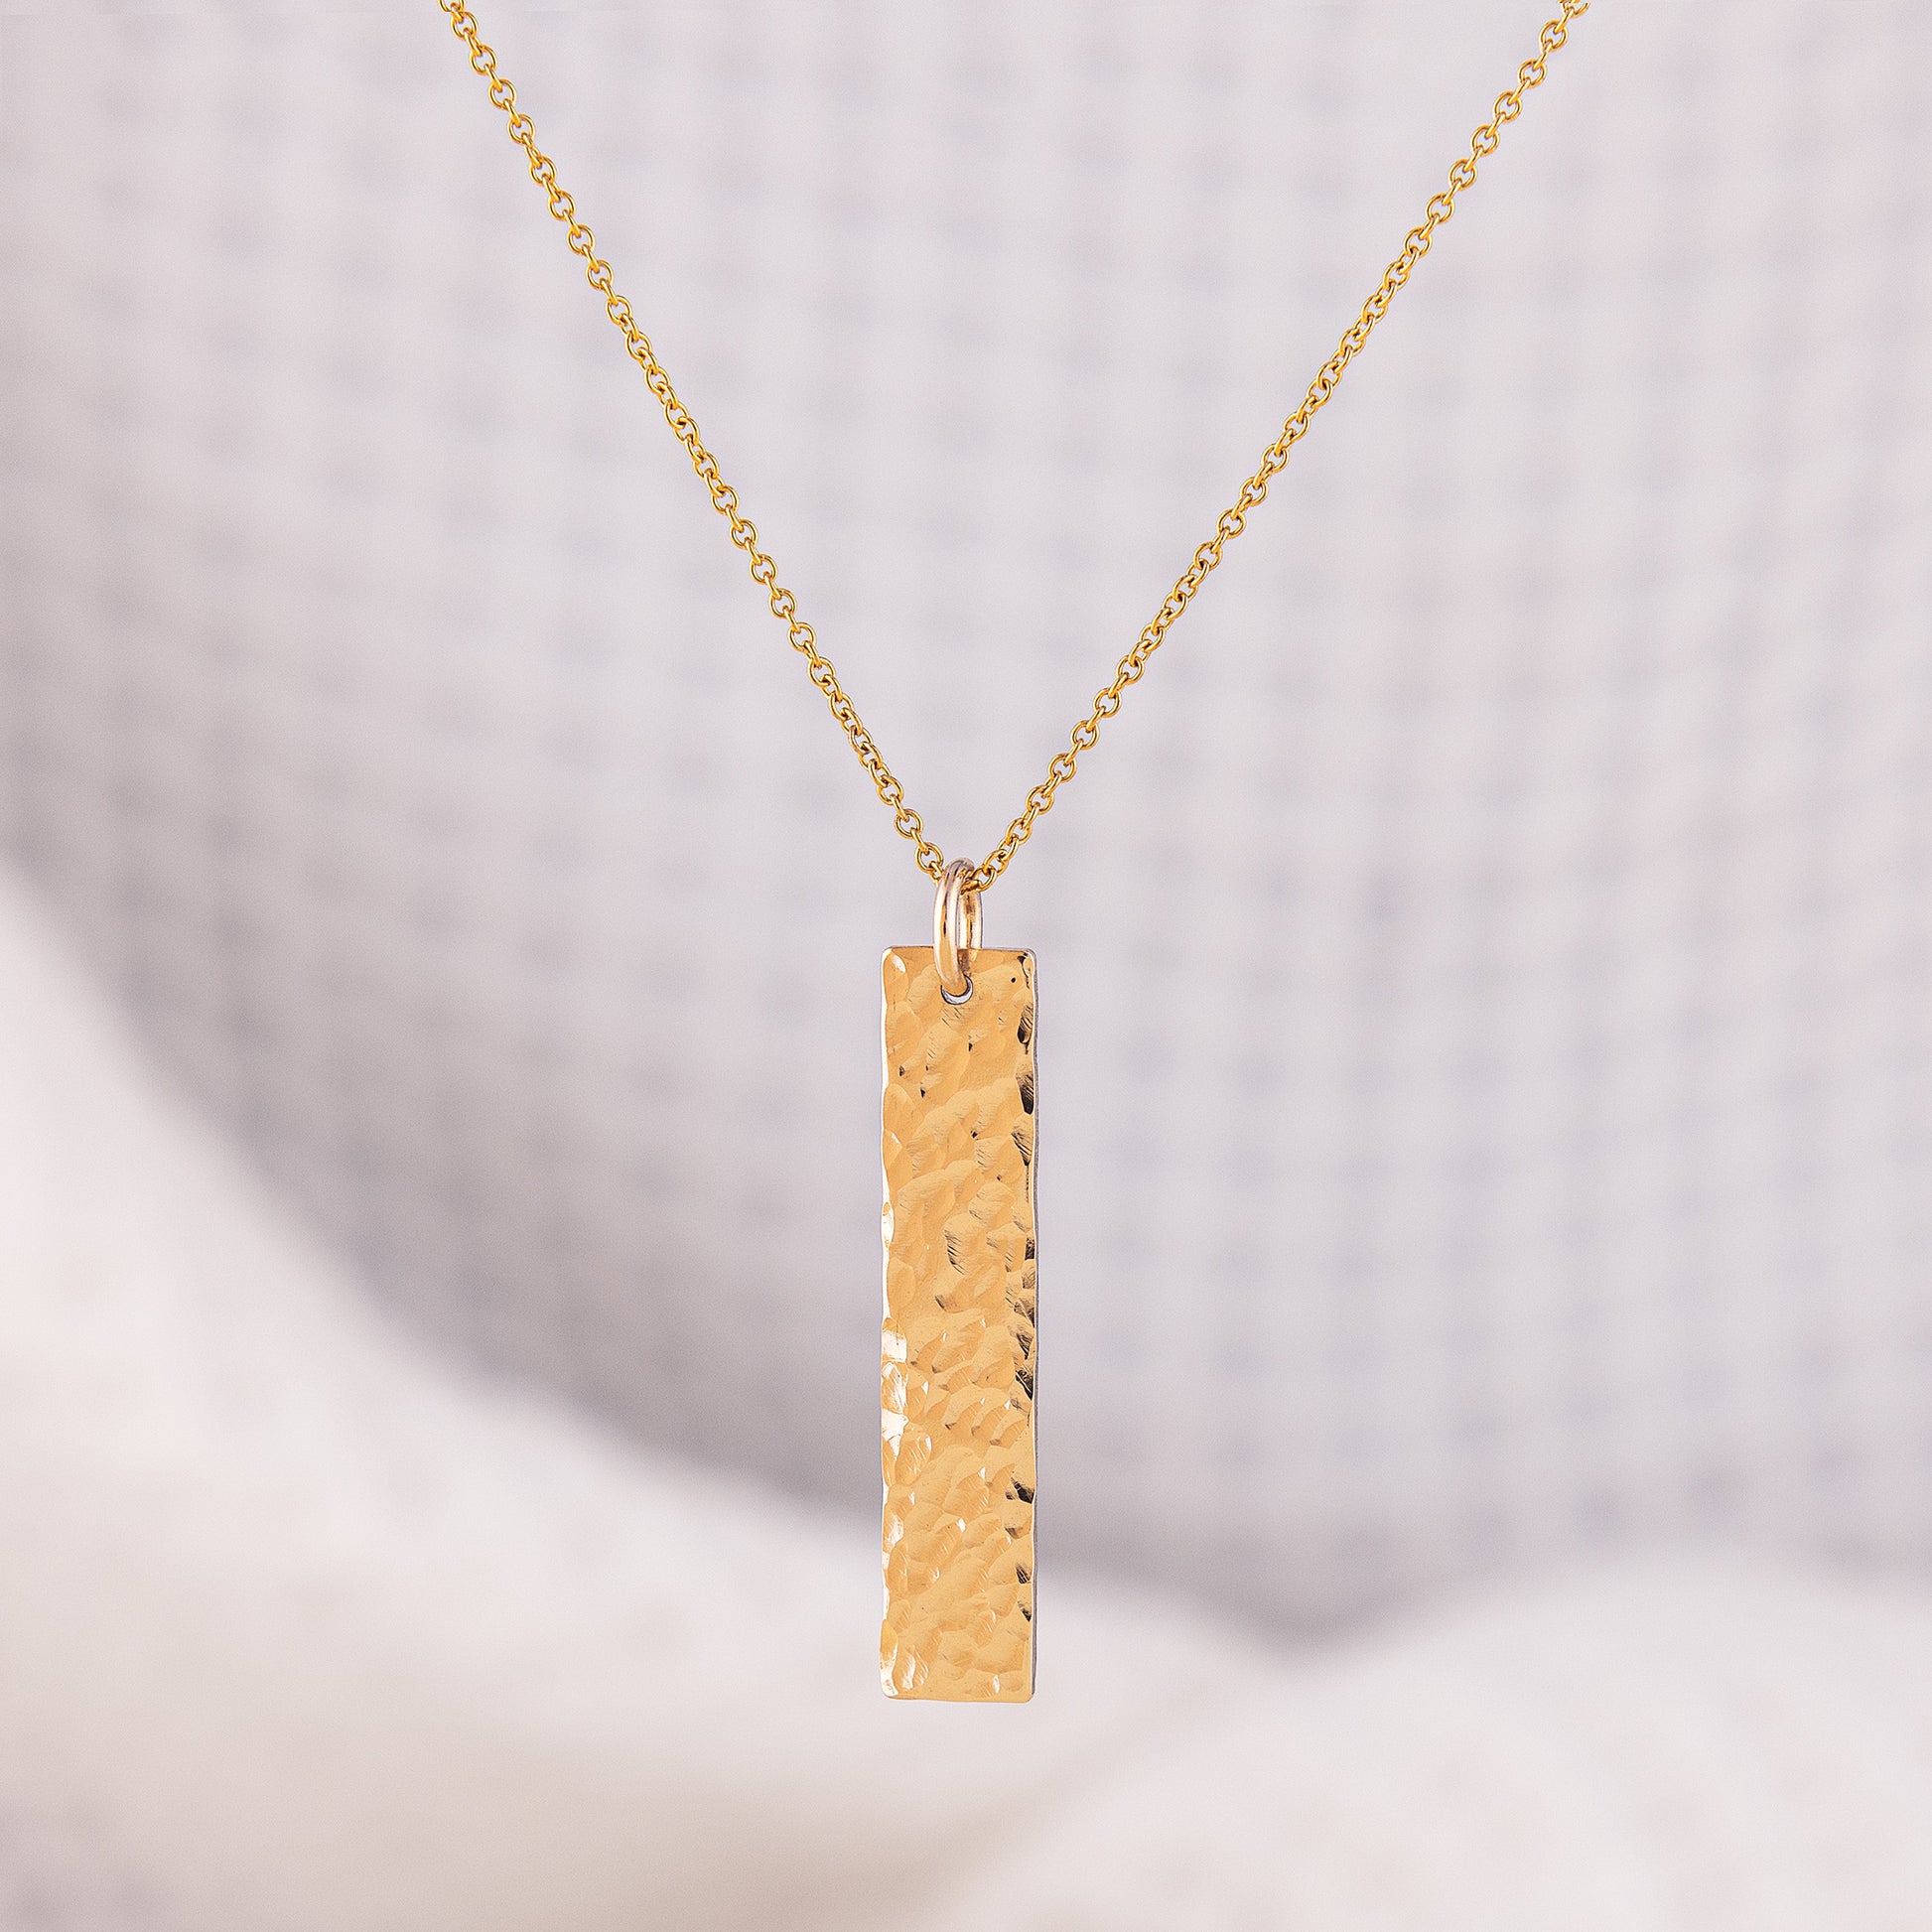 A hammered bar pendant necklace. The pendant is 14ct gold fill and has a hammered finish, it can be customised with a hand stamped word/ name of your choice. The bar is sparkly and hangs upon a fine chain